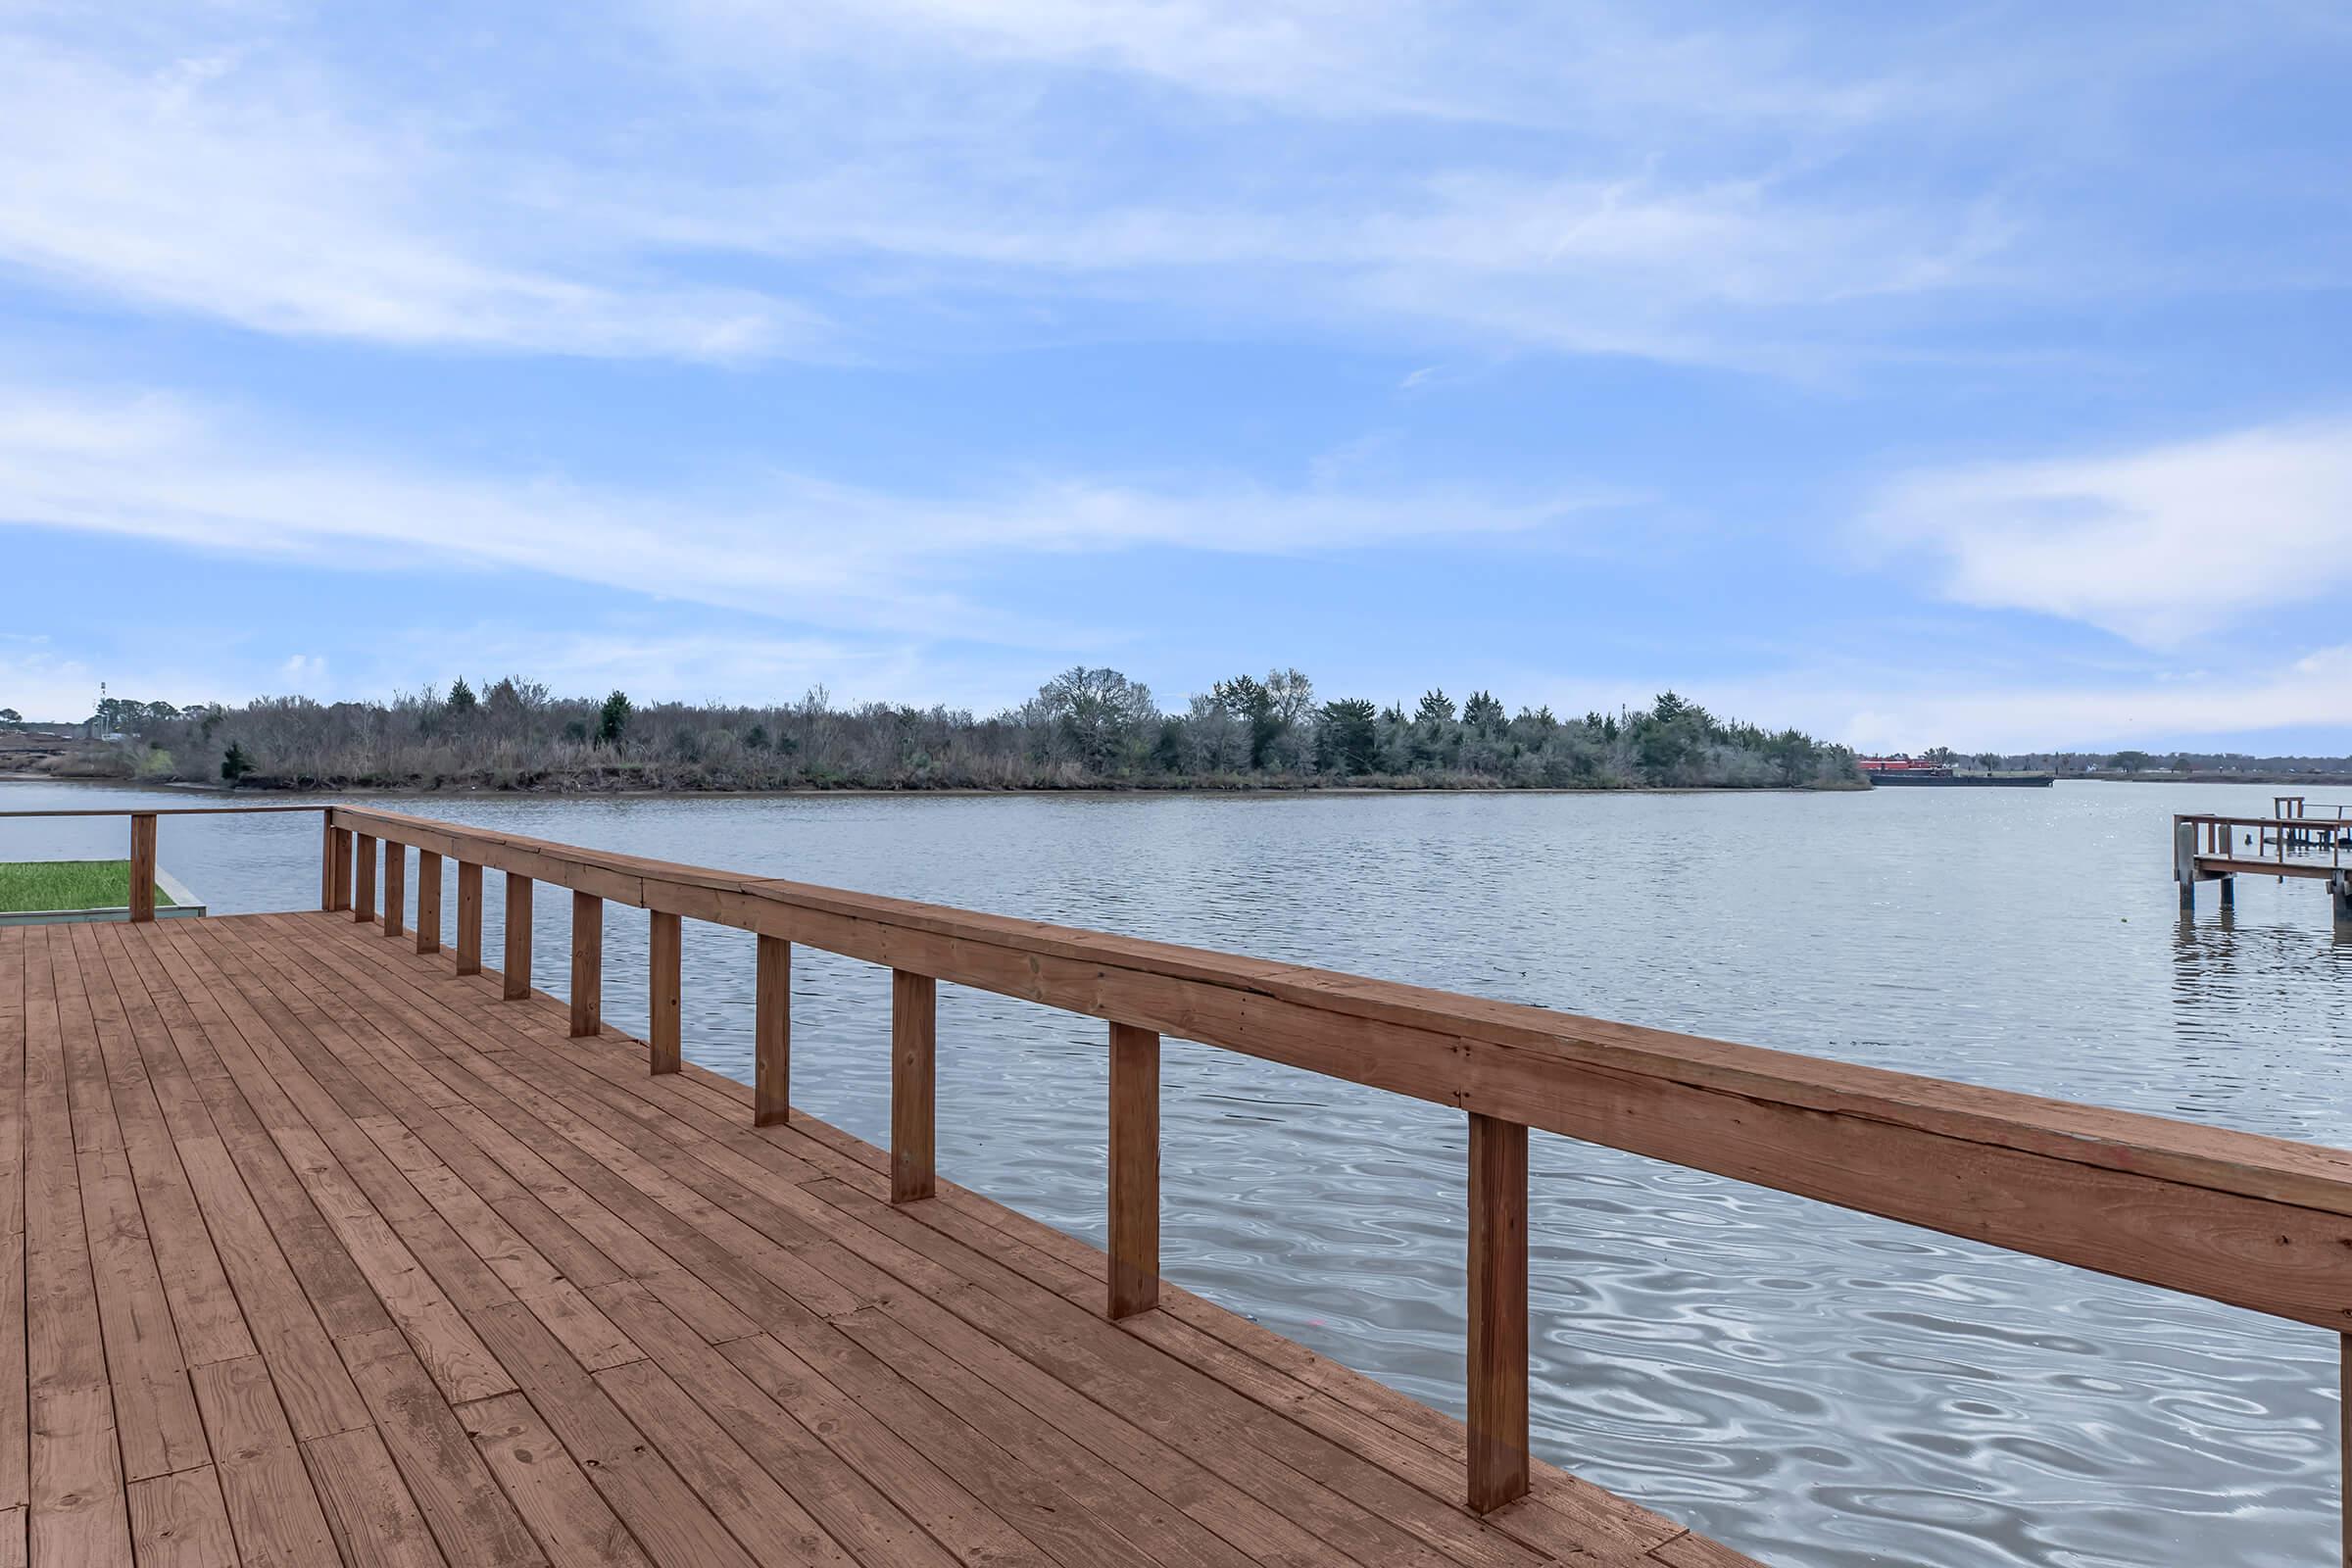 a wooden pier next to a body of water